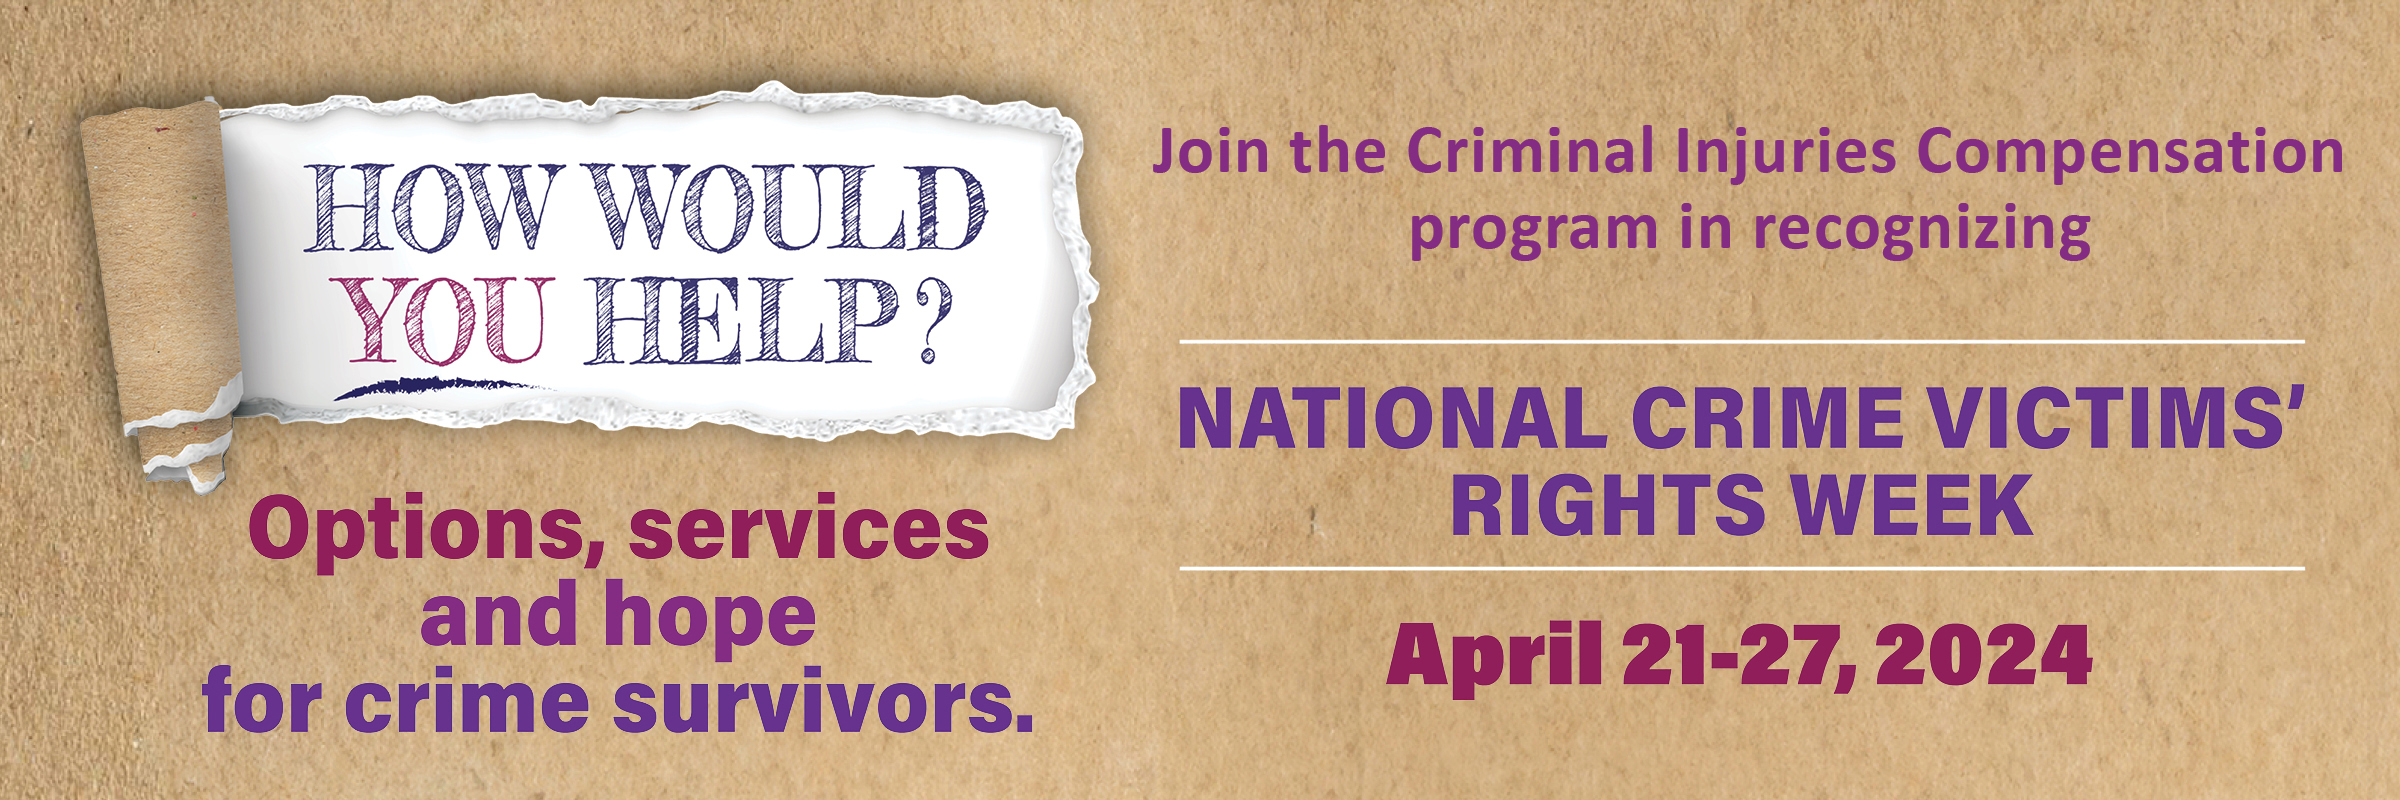 National Crime Victims Rights Week Banner 2024